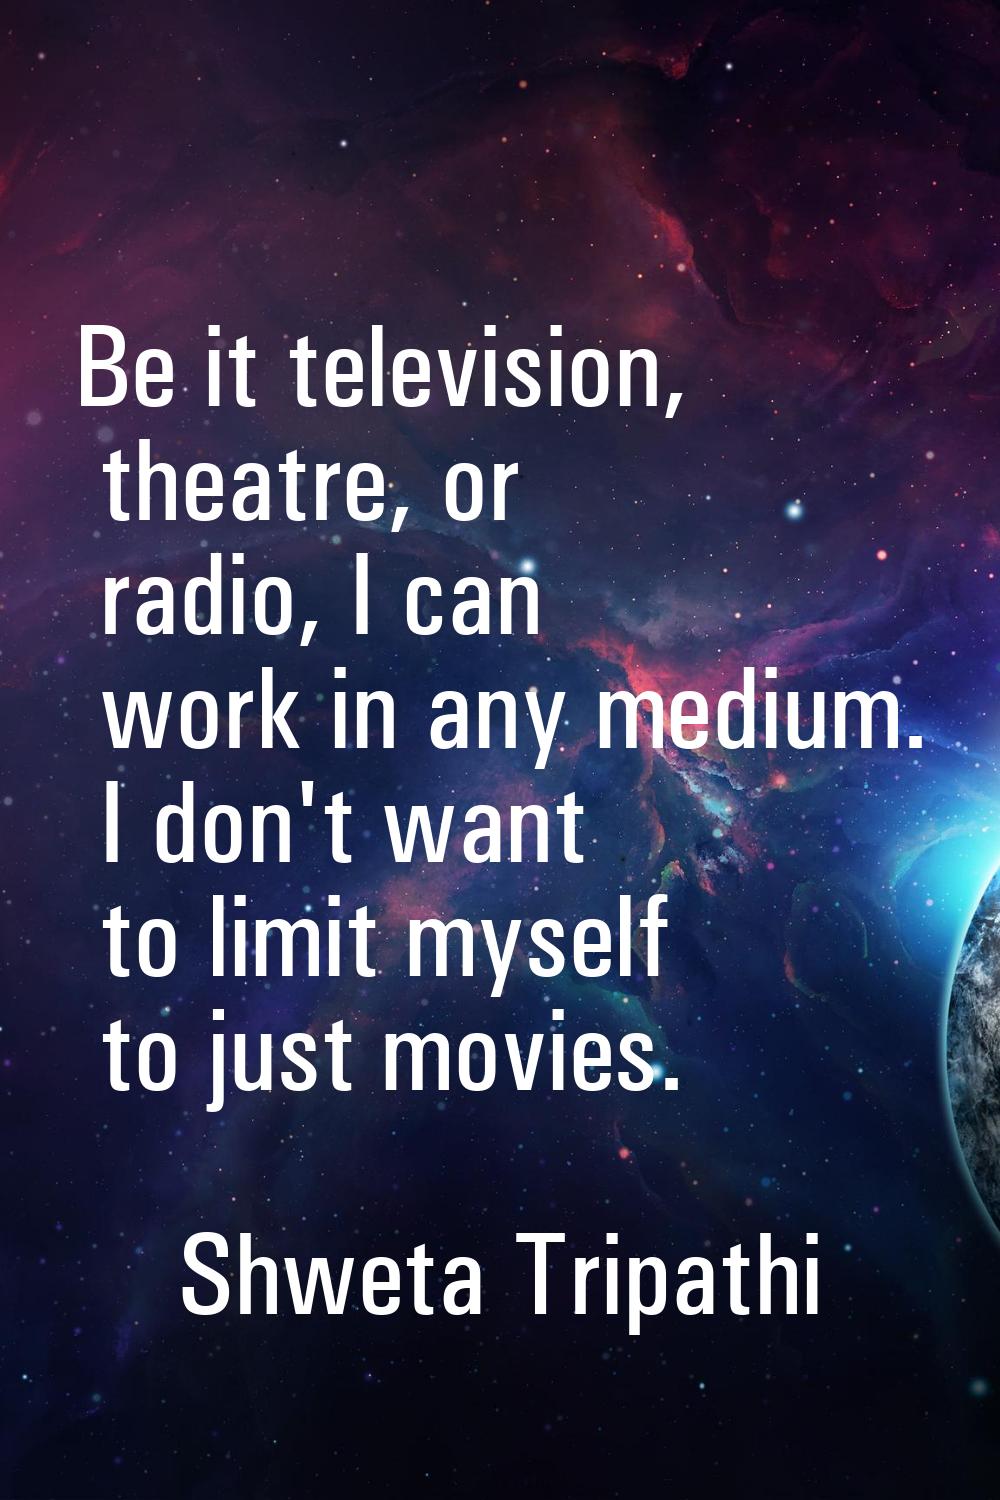 Be it television, theatre, or radio, I can work in any medium. I don't want to limit myself to just